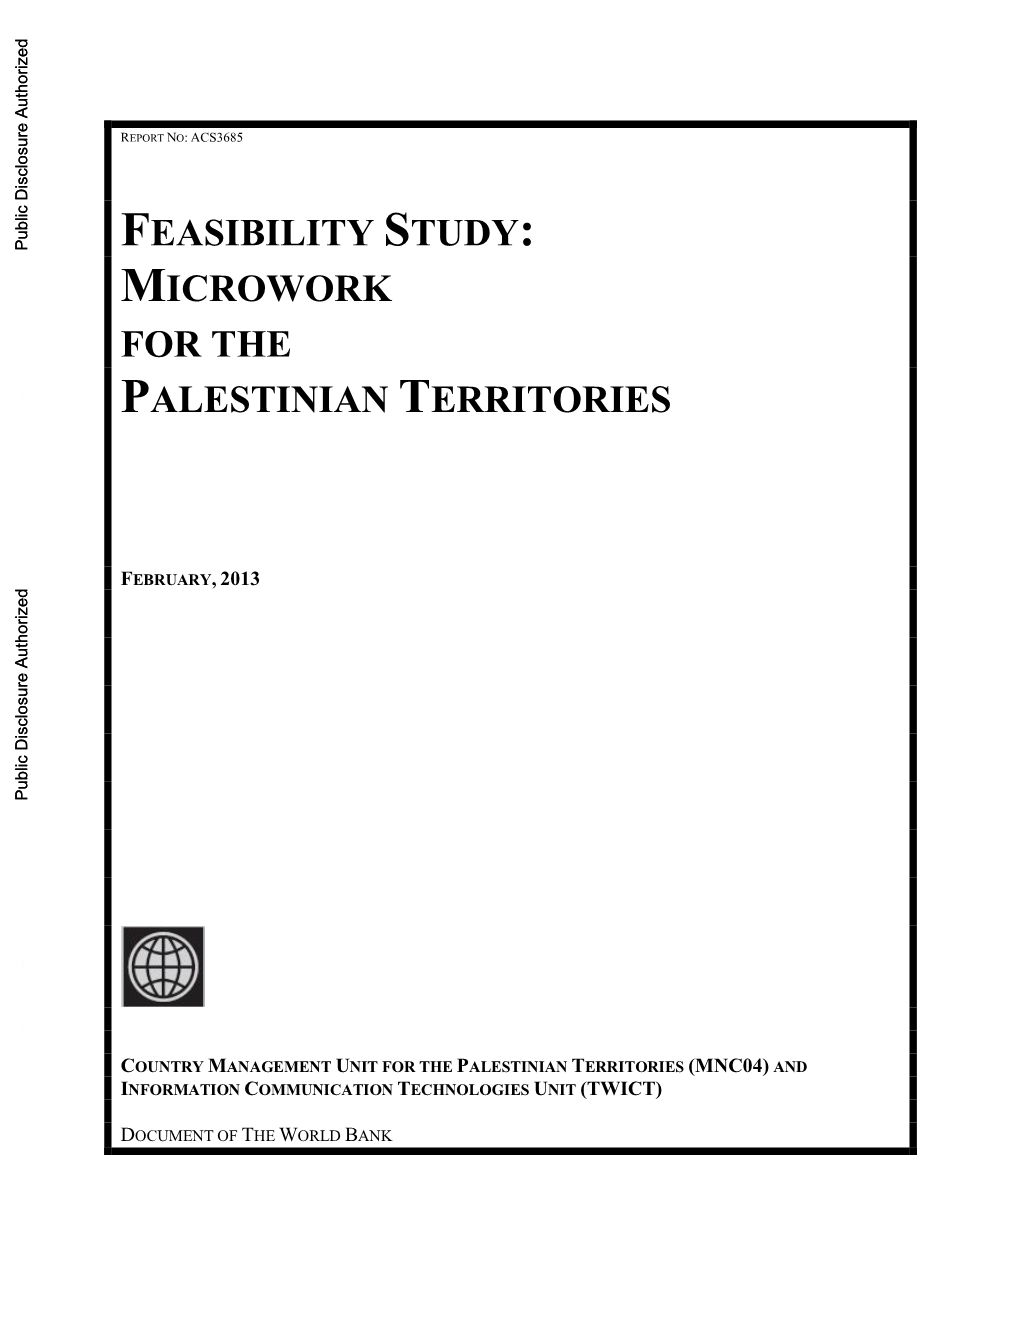 Feasibility Study: Microwork for the Palestinian Territories